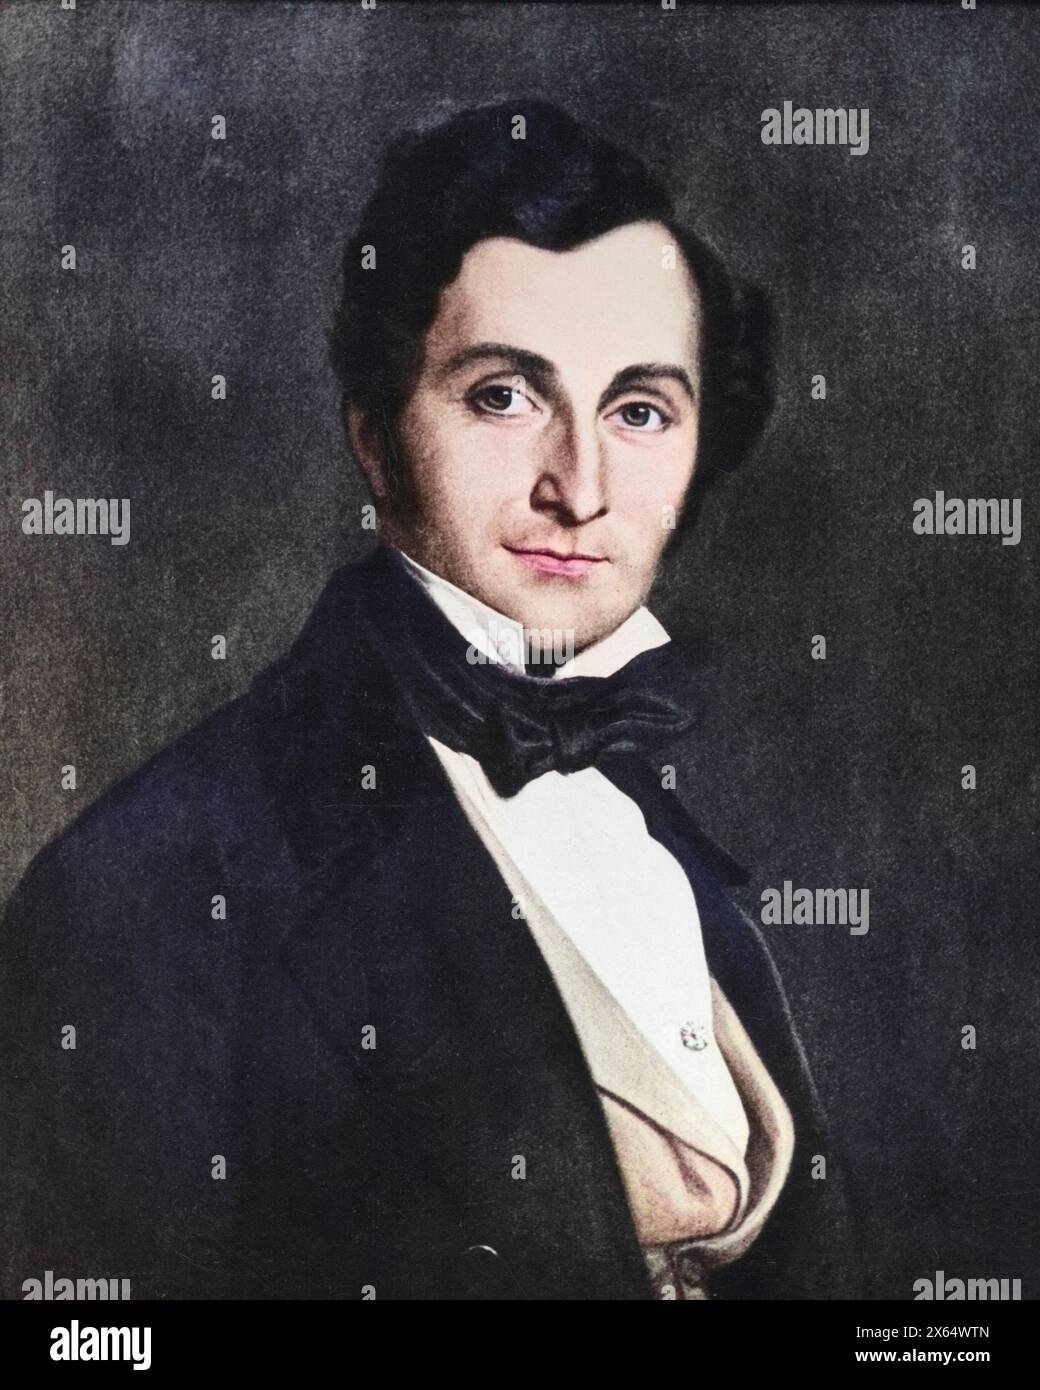 Lortzing, Albert, 23.10.1801 - 21.1.1851, German composer, portrait, ADDITIONAL-RIGHTS-CLEARANCE-INFO-NOT-AVAILABLE Stock Photo